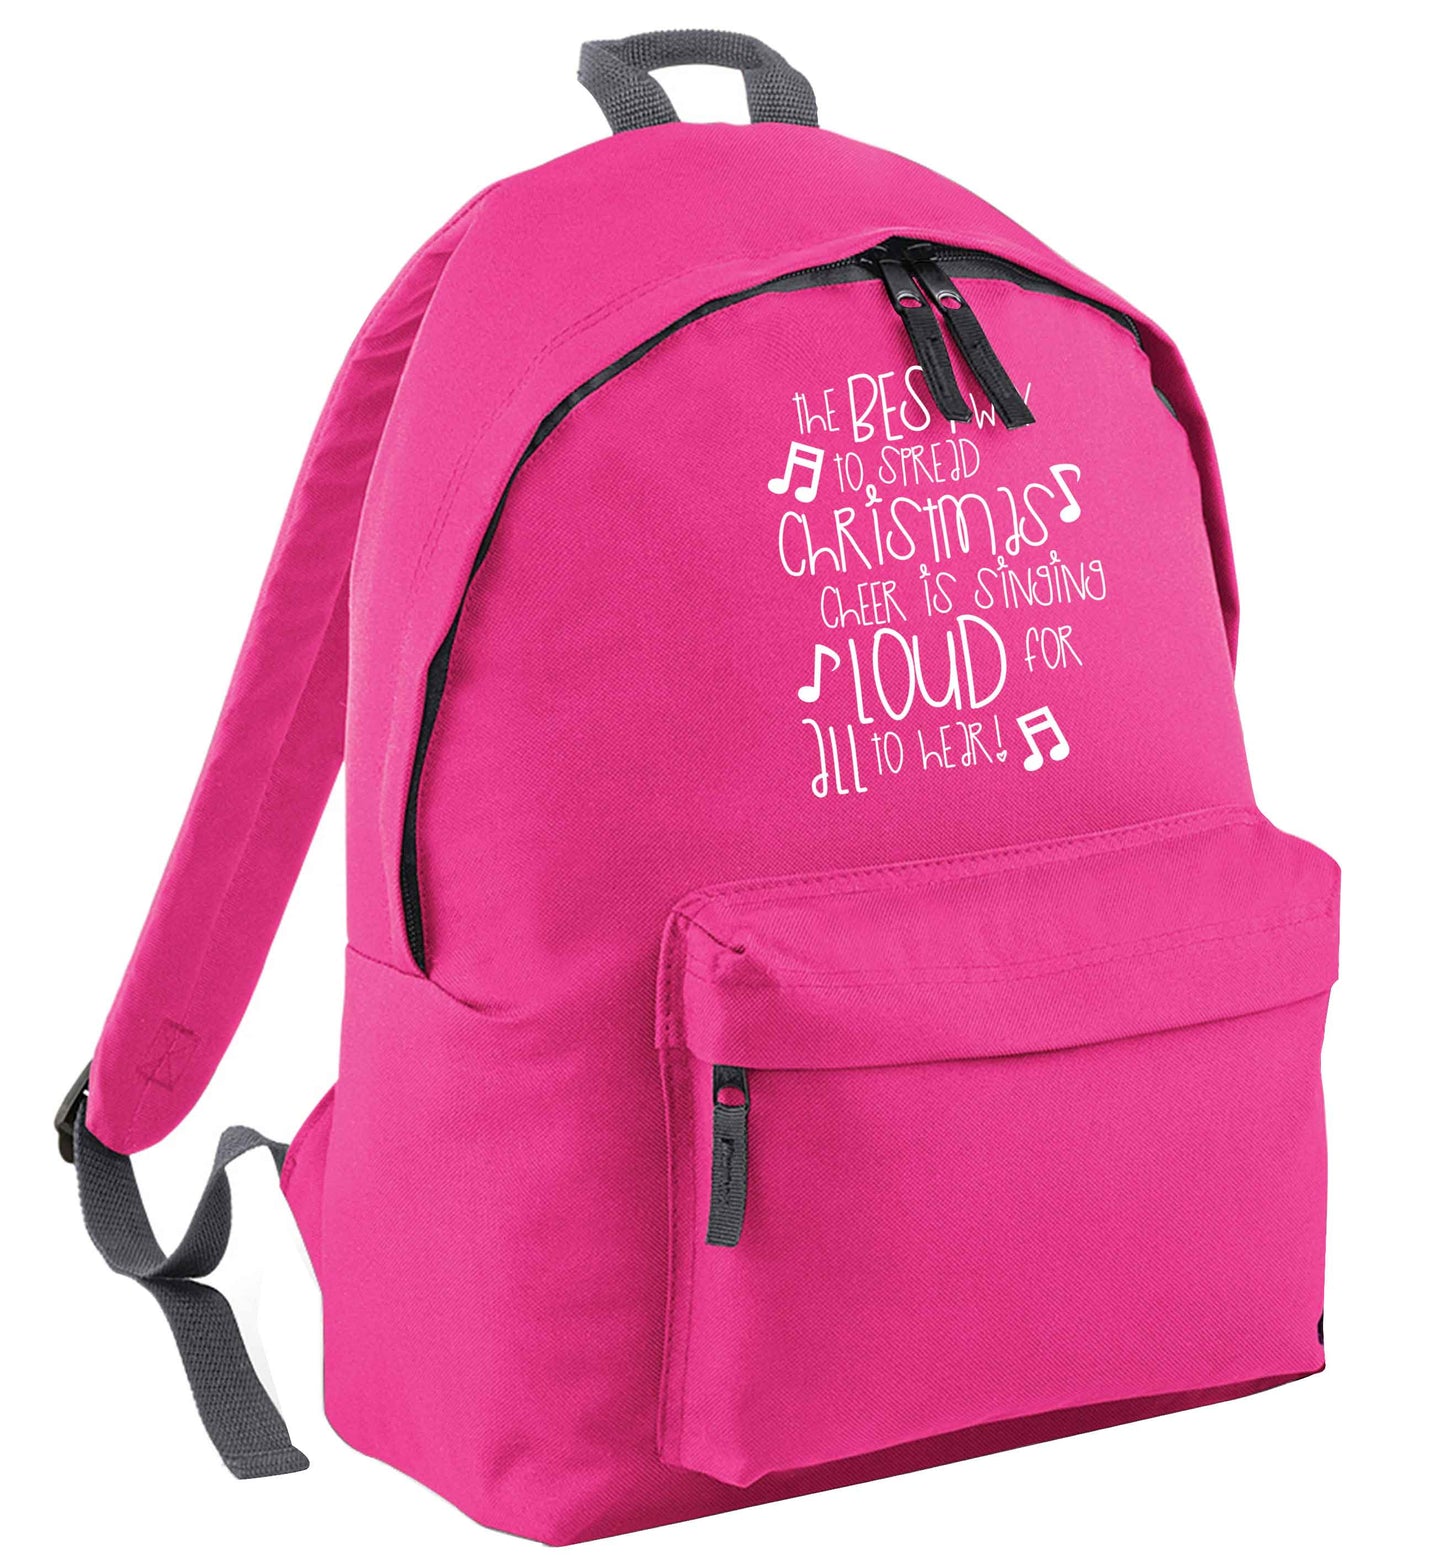 The best way to spread Christmas cheer is singing loud for all to hear pink adults backpack